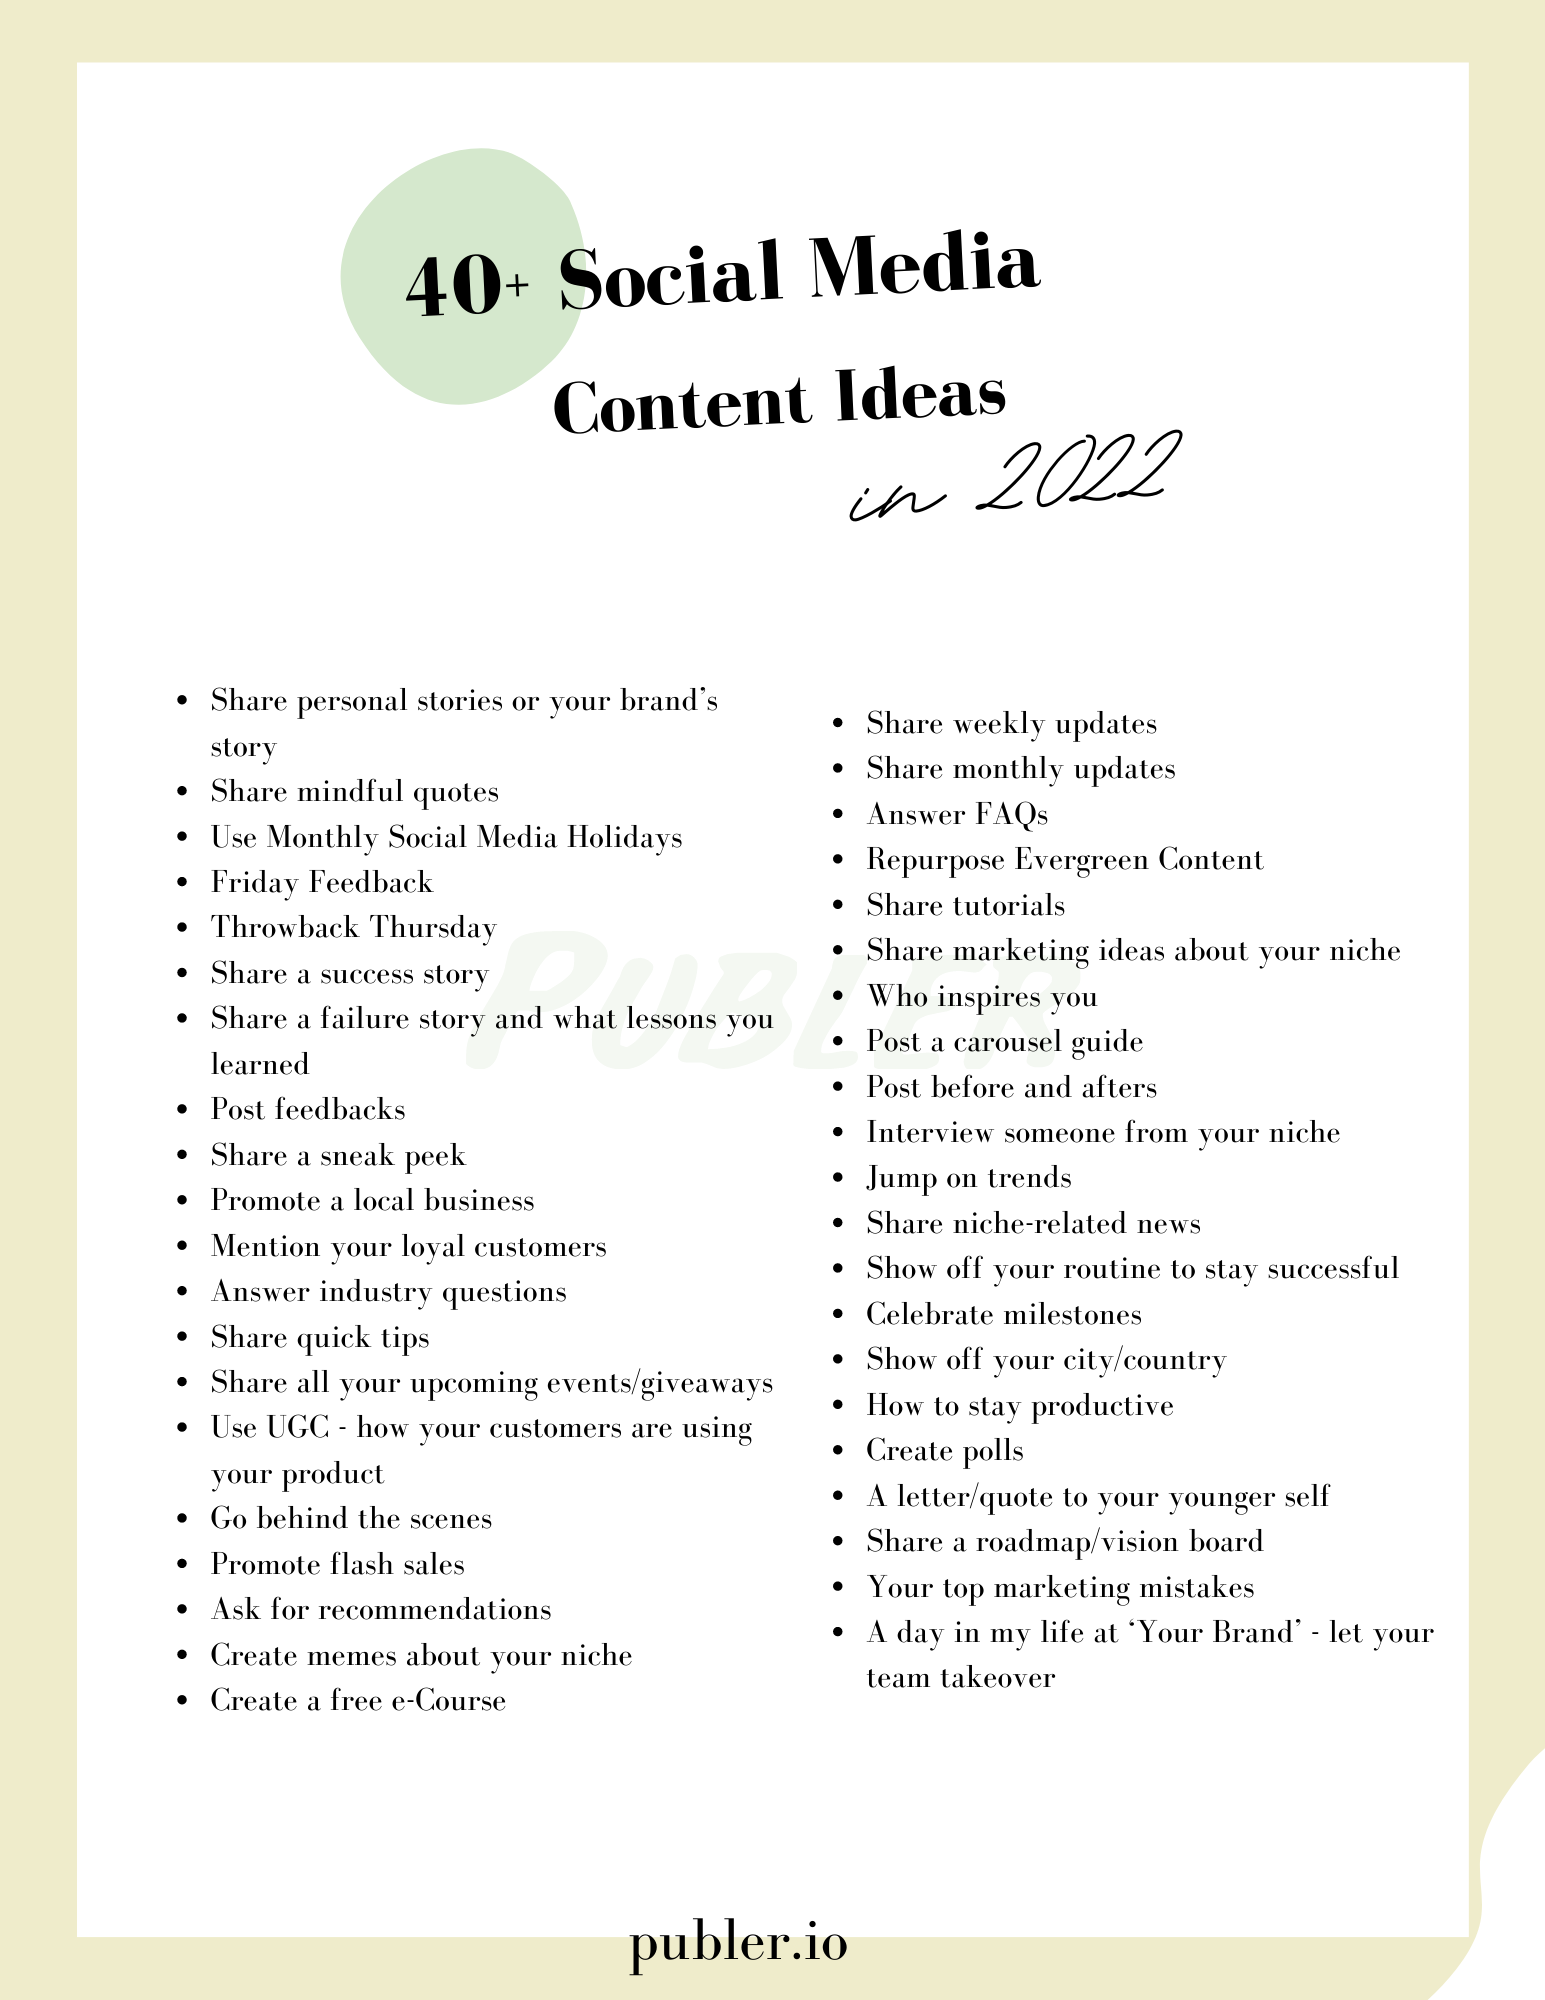 40+ Social Media Content Ideas in 2022 by Publer